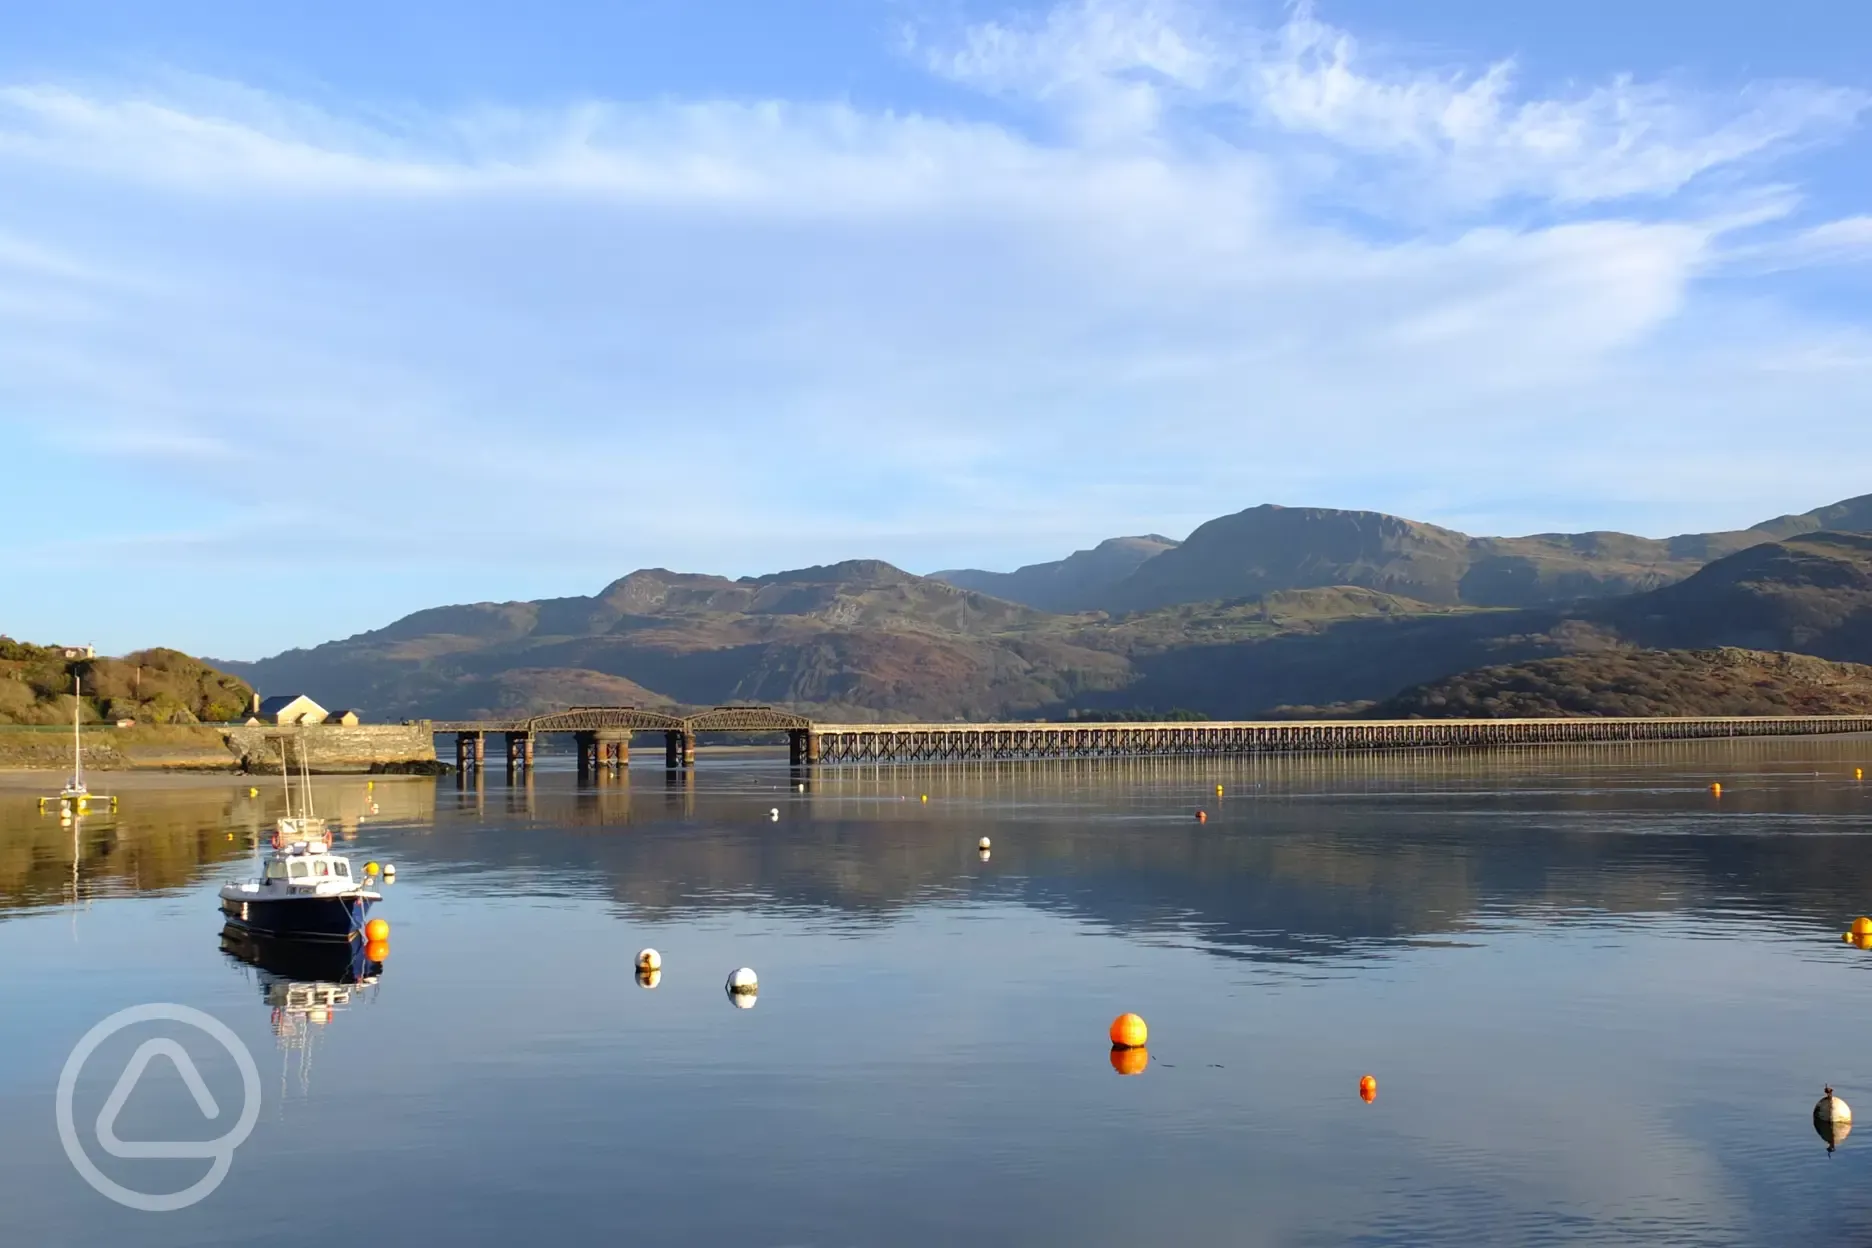 Nearby Barmouth